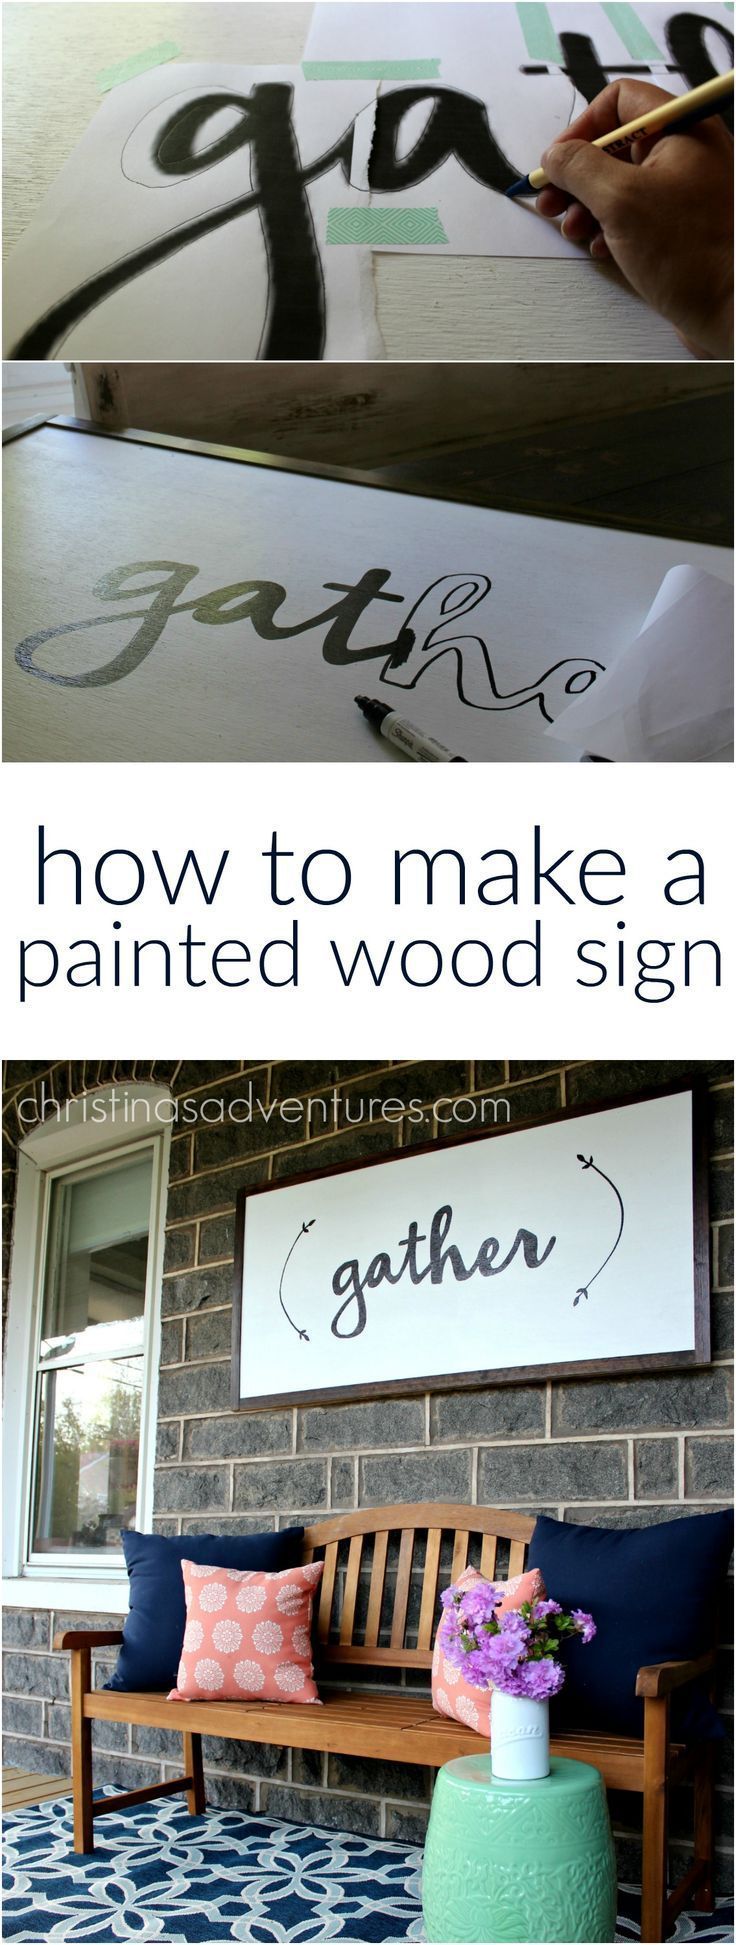 Great DIY tutorial for how to make a large painted wood sign – NO special tools required! Anyone could make this project!